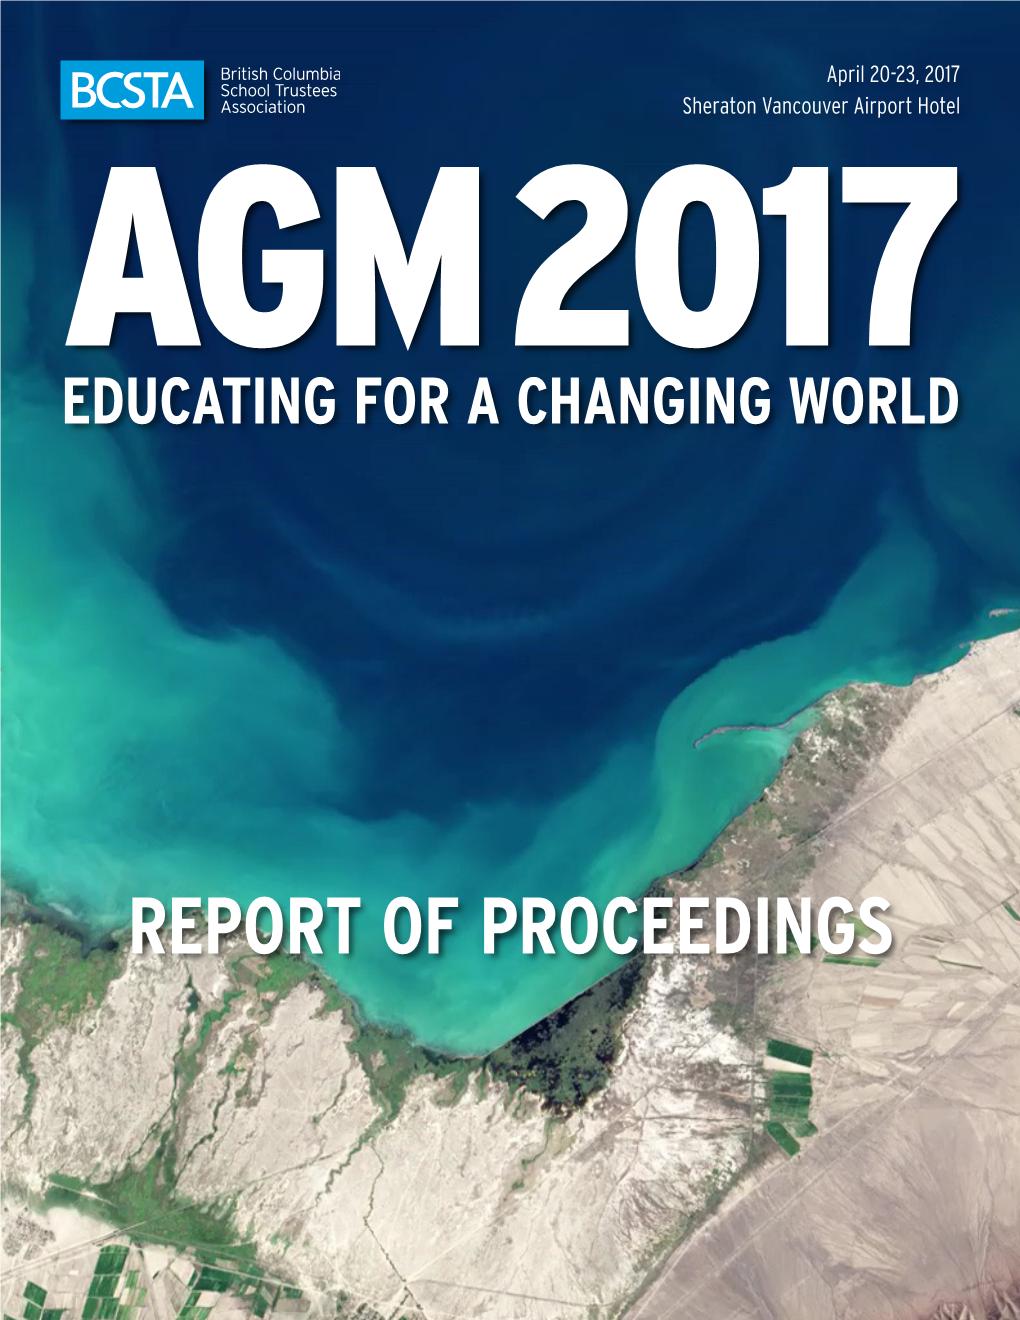 REPORT of PROCEEDINGS AGM 2017: Educating for a Changing World Report of Proceedings